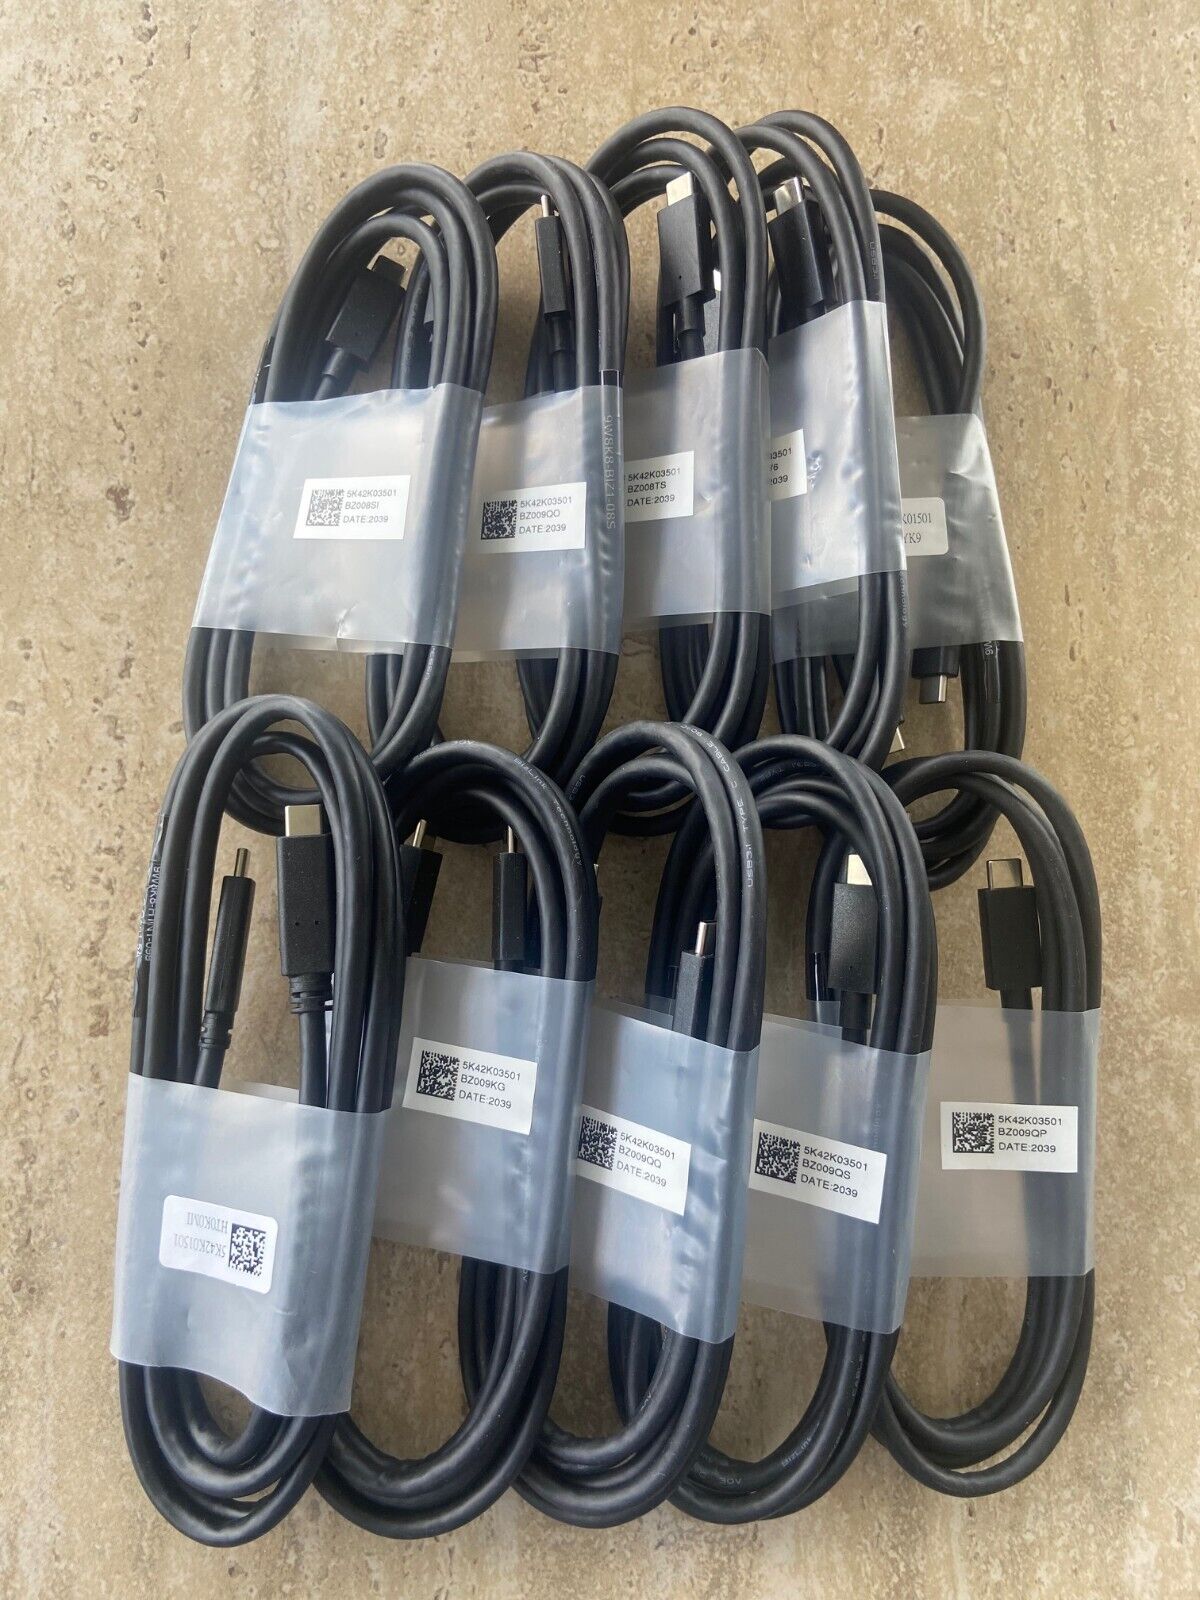 10-Pack of  5k42k01501 DELL USB 3.1 Type C Cable USB-C to USB-C 6 Ft. cable NEW